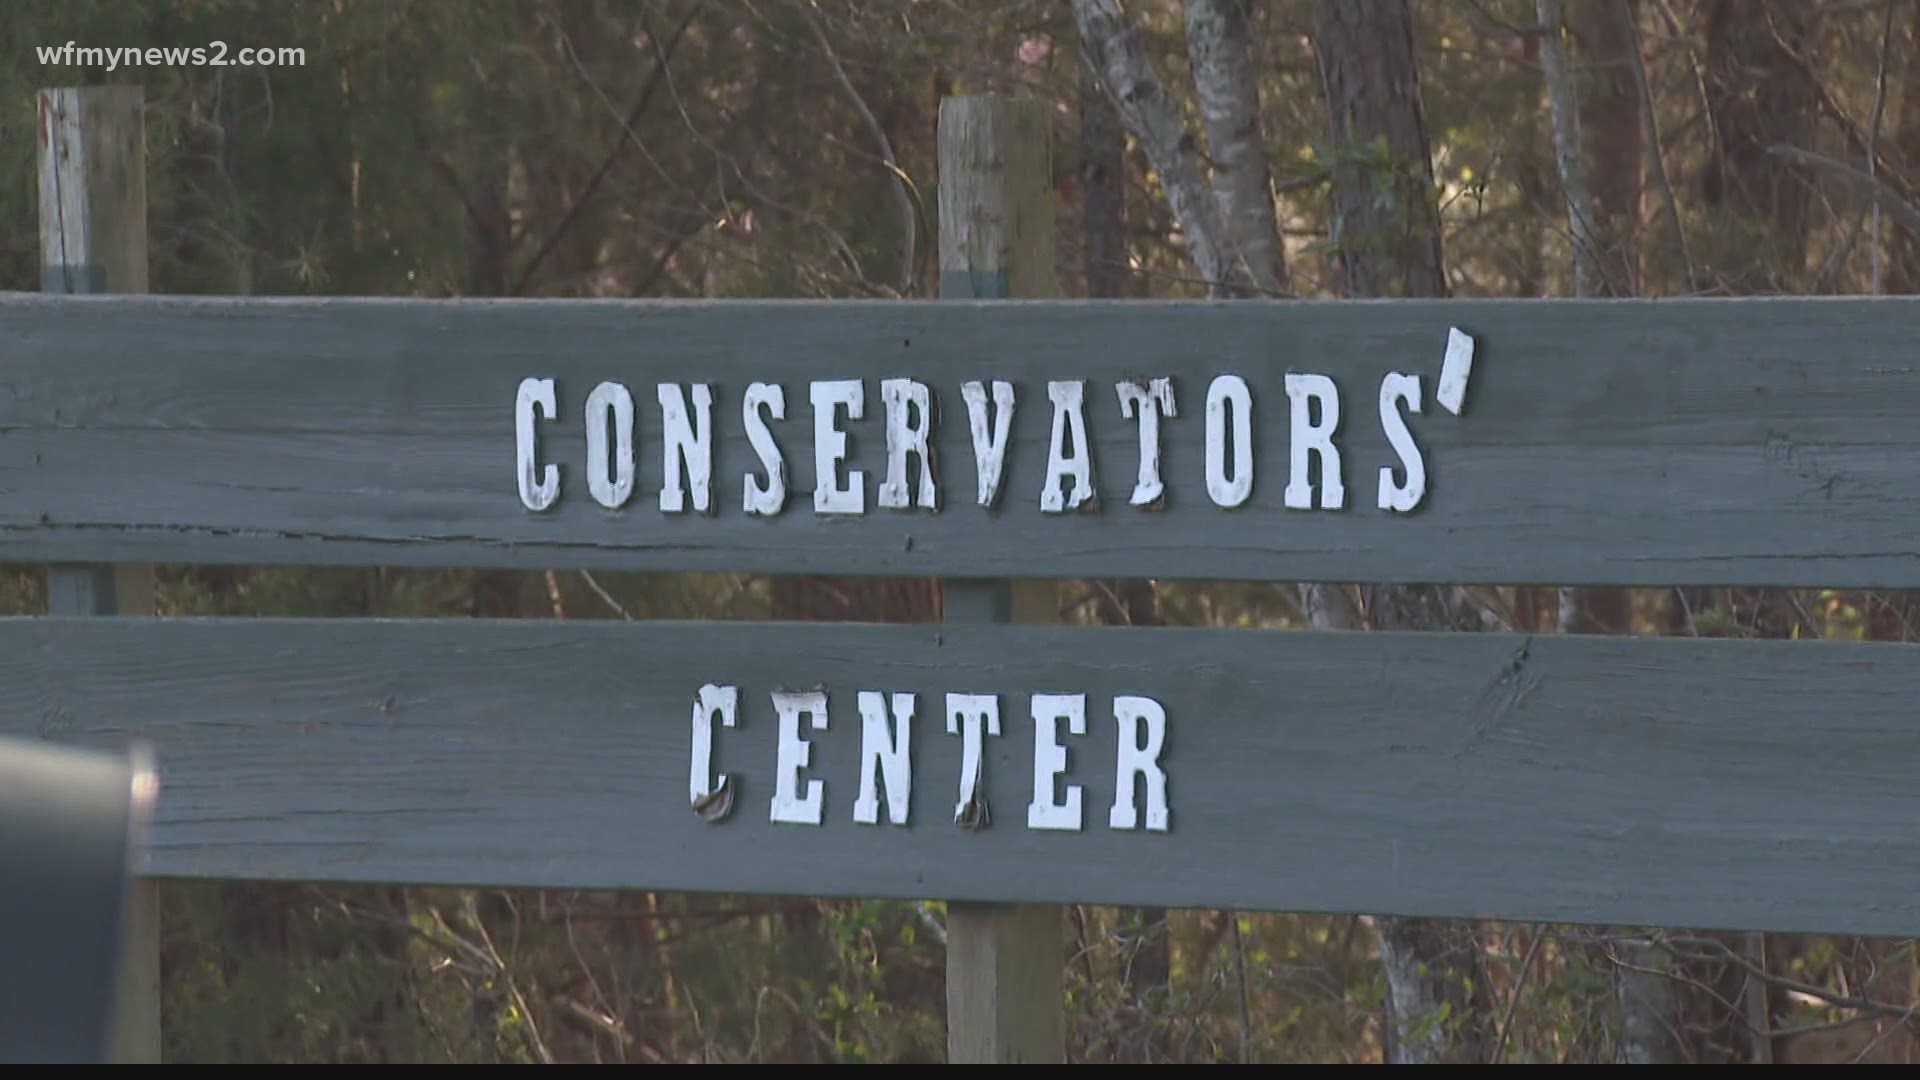 Two wolves attacked the woman at the Caswell County animal park. It's the second animal attack at the park in just over two years.